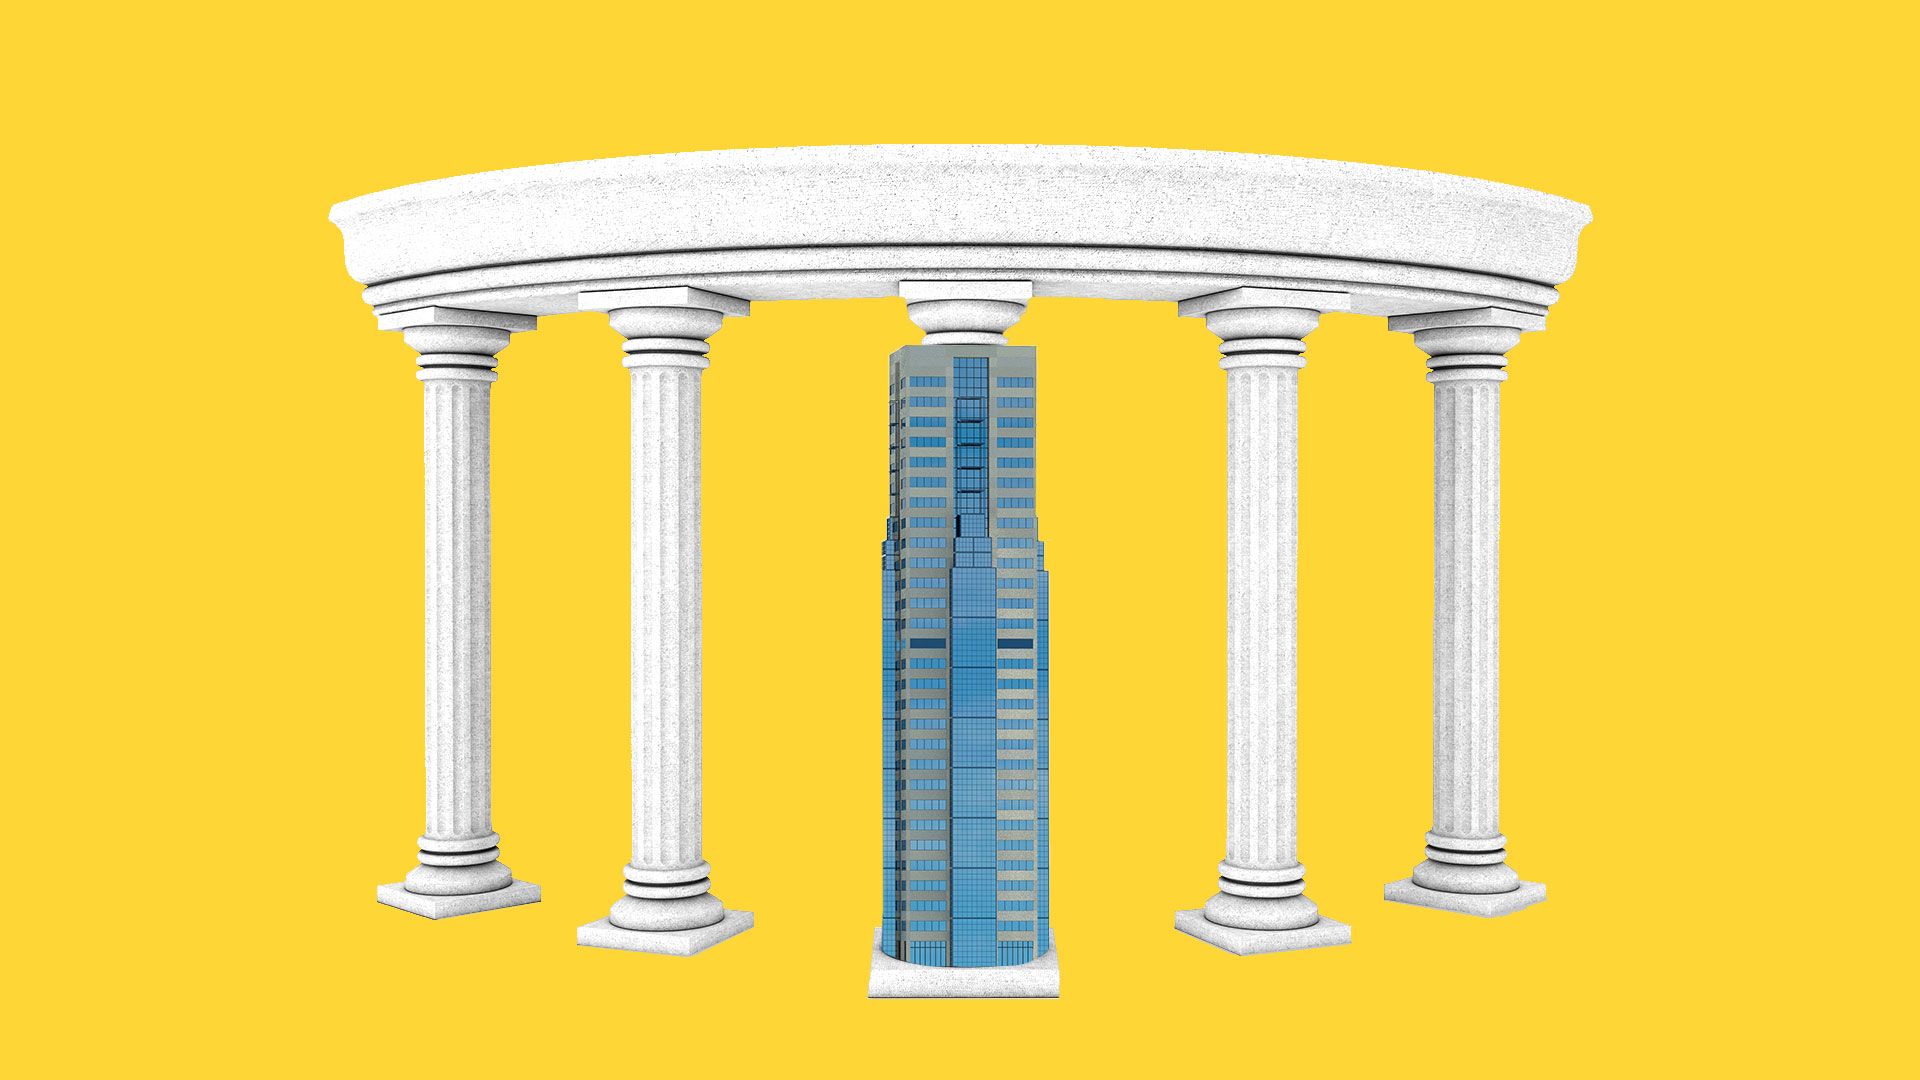 Illustration of a circle of columns with the center column replaced by a skyscraper